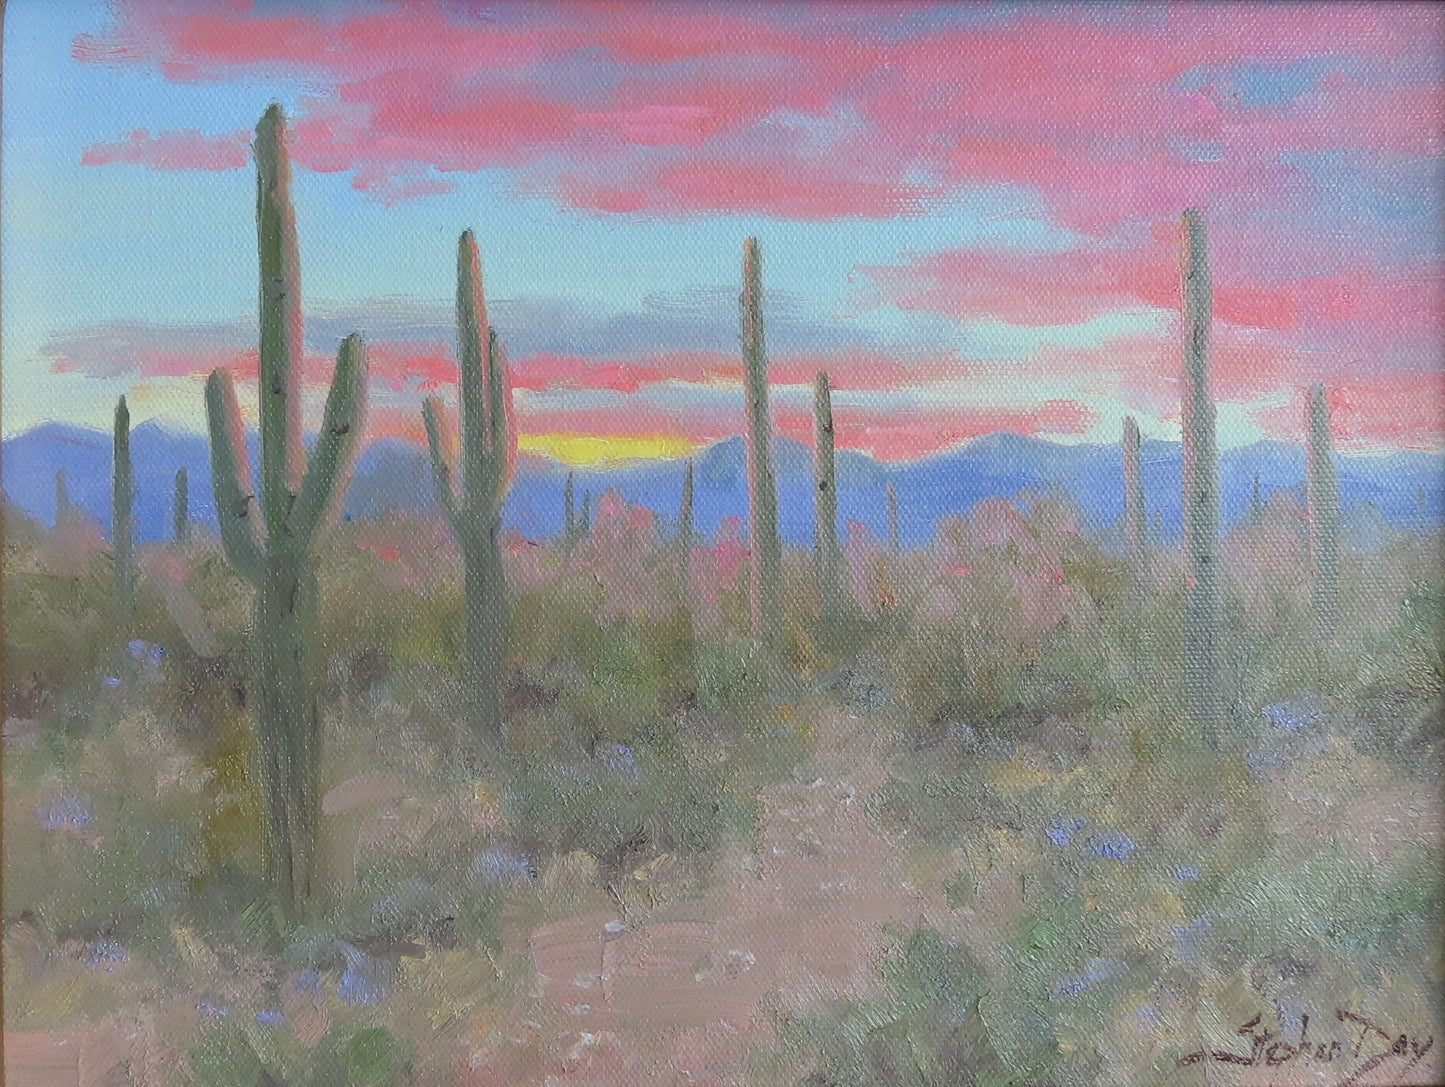 Evening In The Sonoran Desert-painting-Stephen Day-Sorrel Sky Gallery